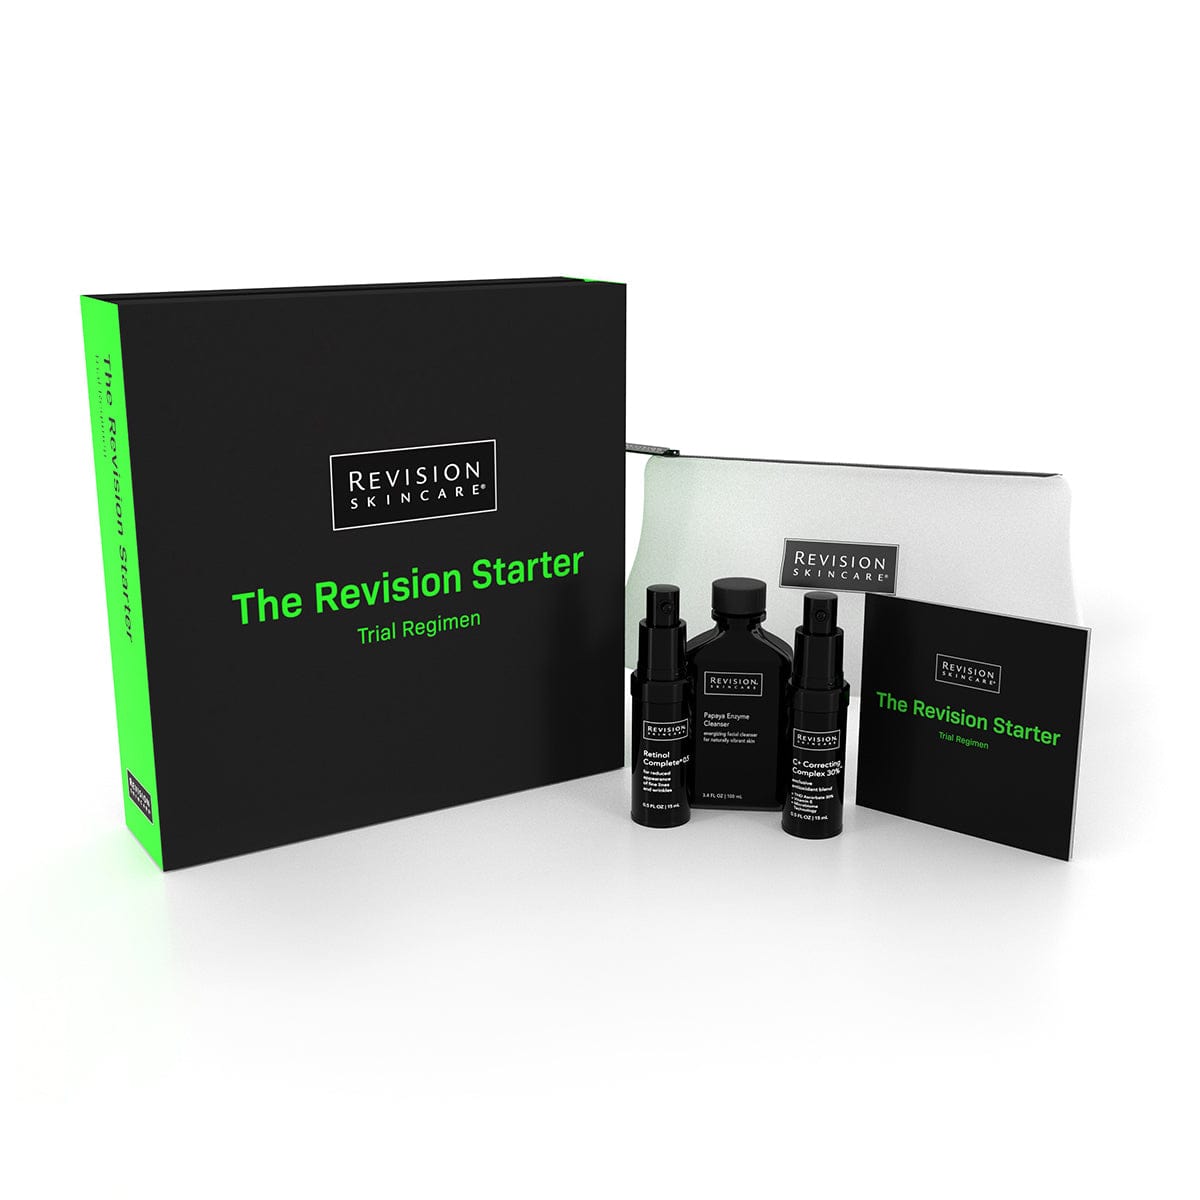 The Revision Starter Limited Edition Trial Regimen Collection